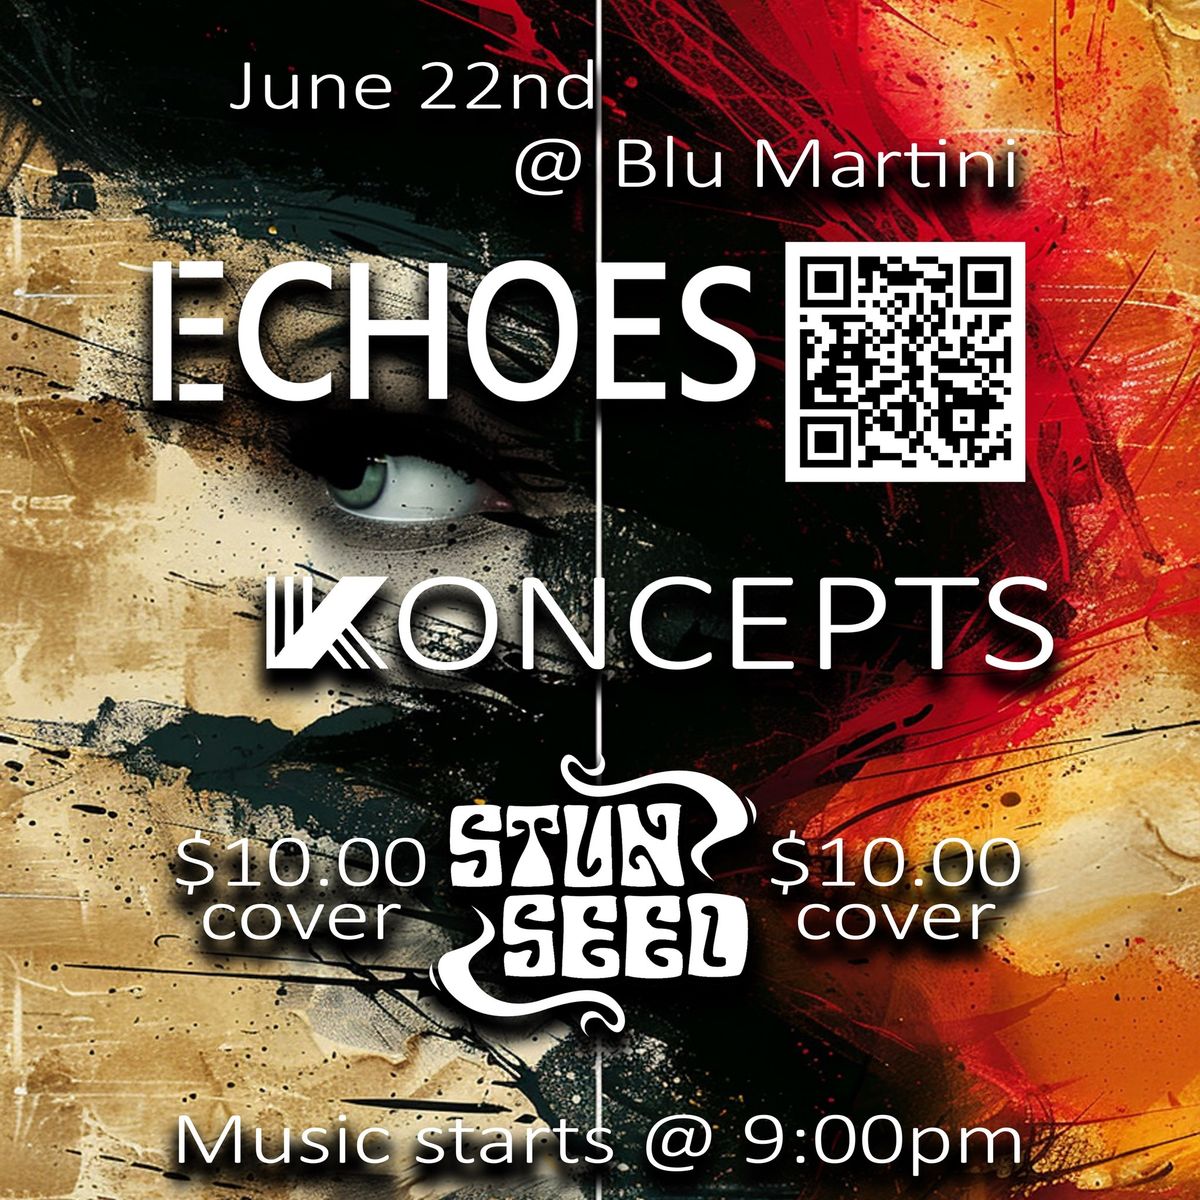 Echoes @ BLU Martini and other special guests Koncepts & Stun Seed